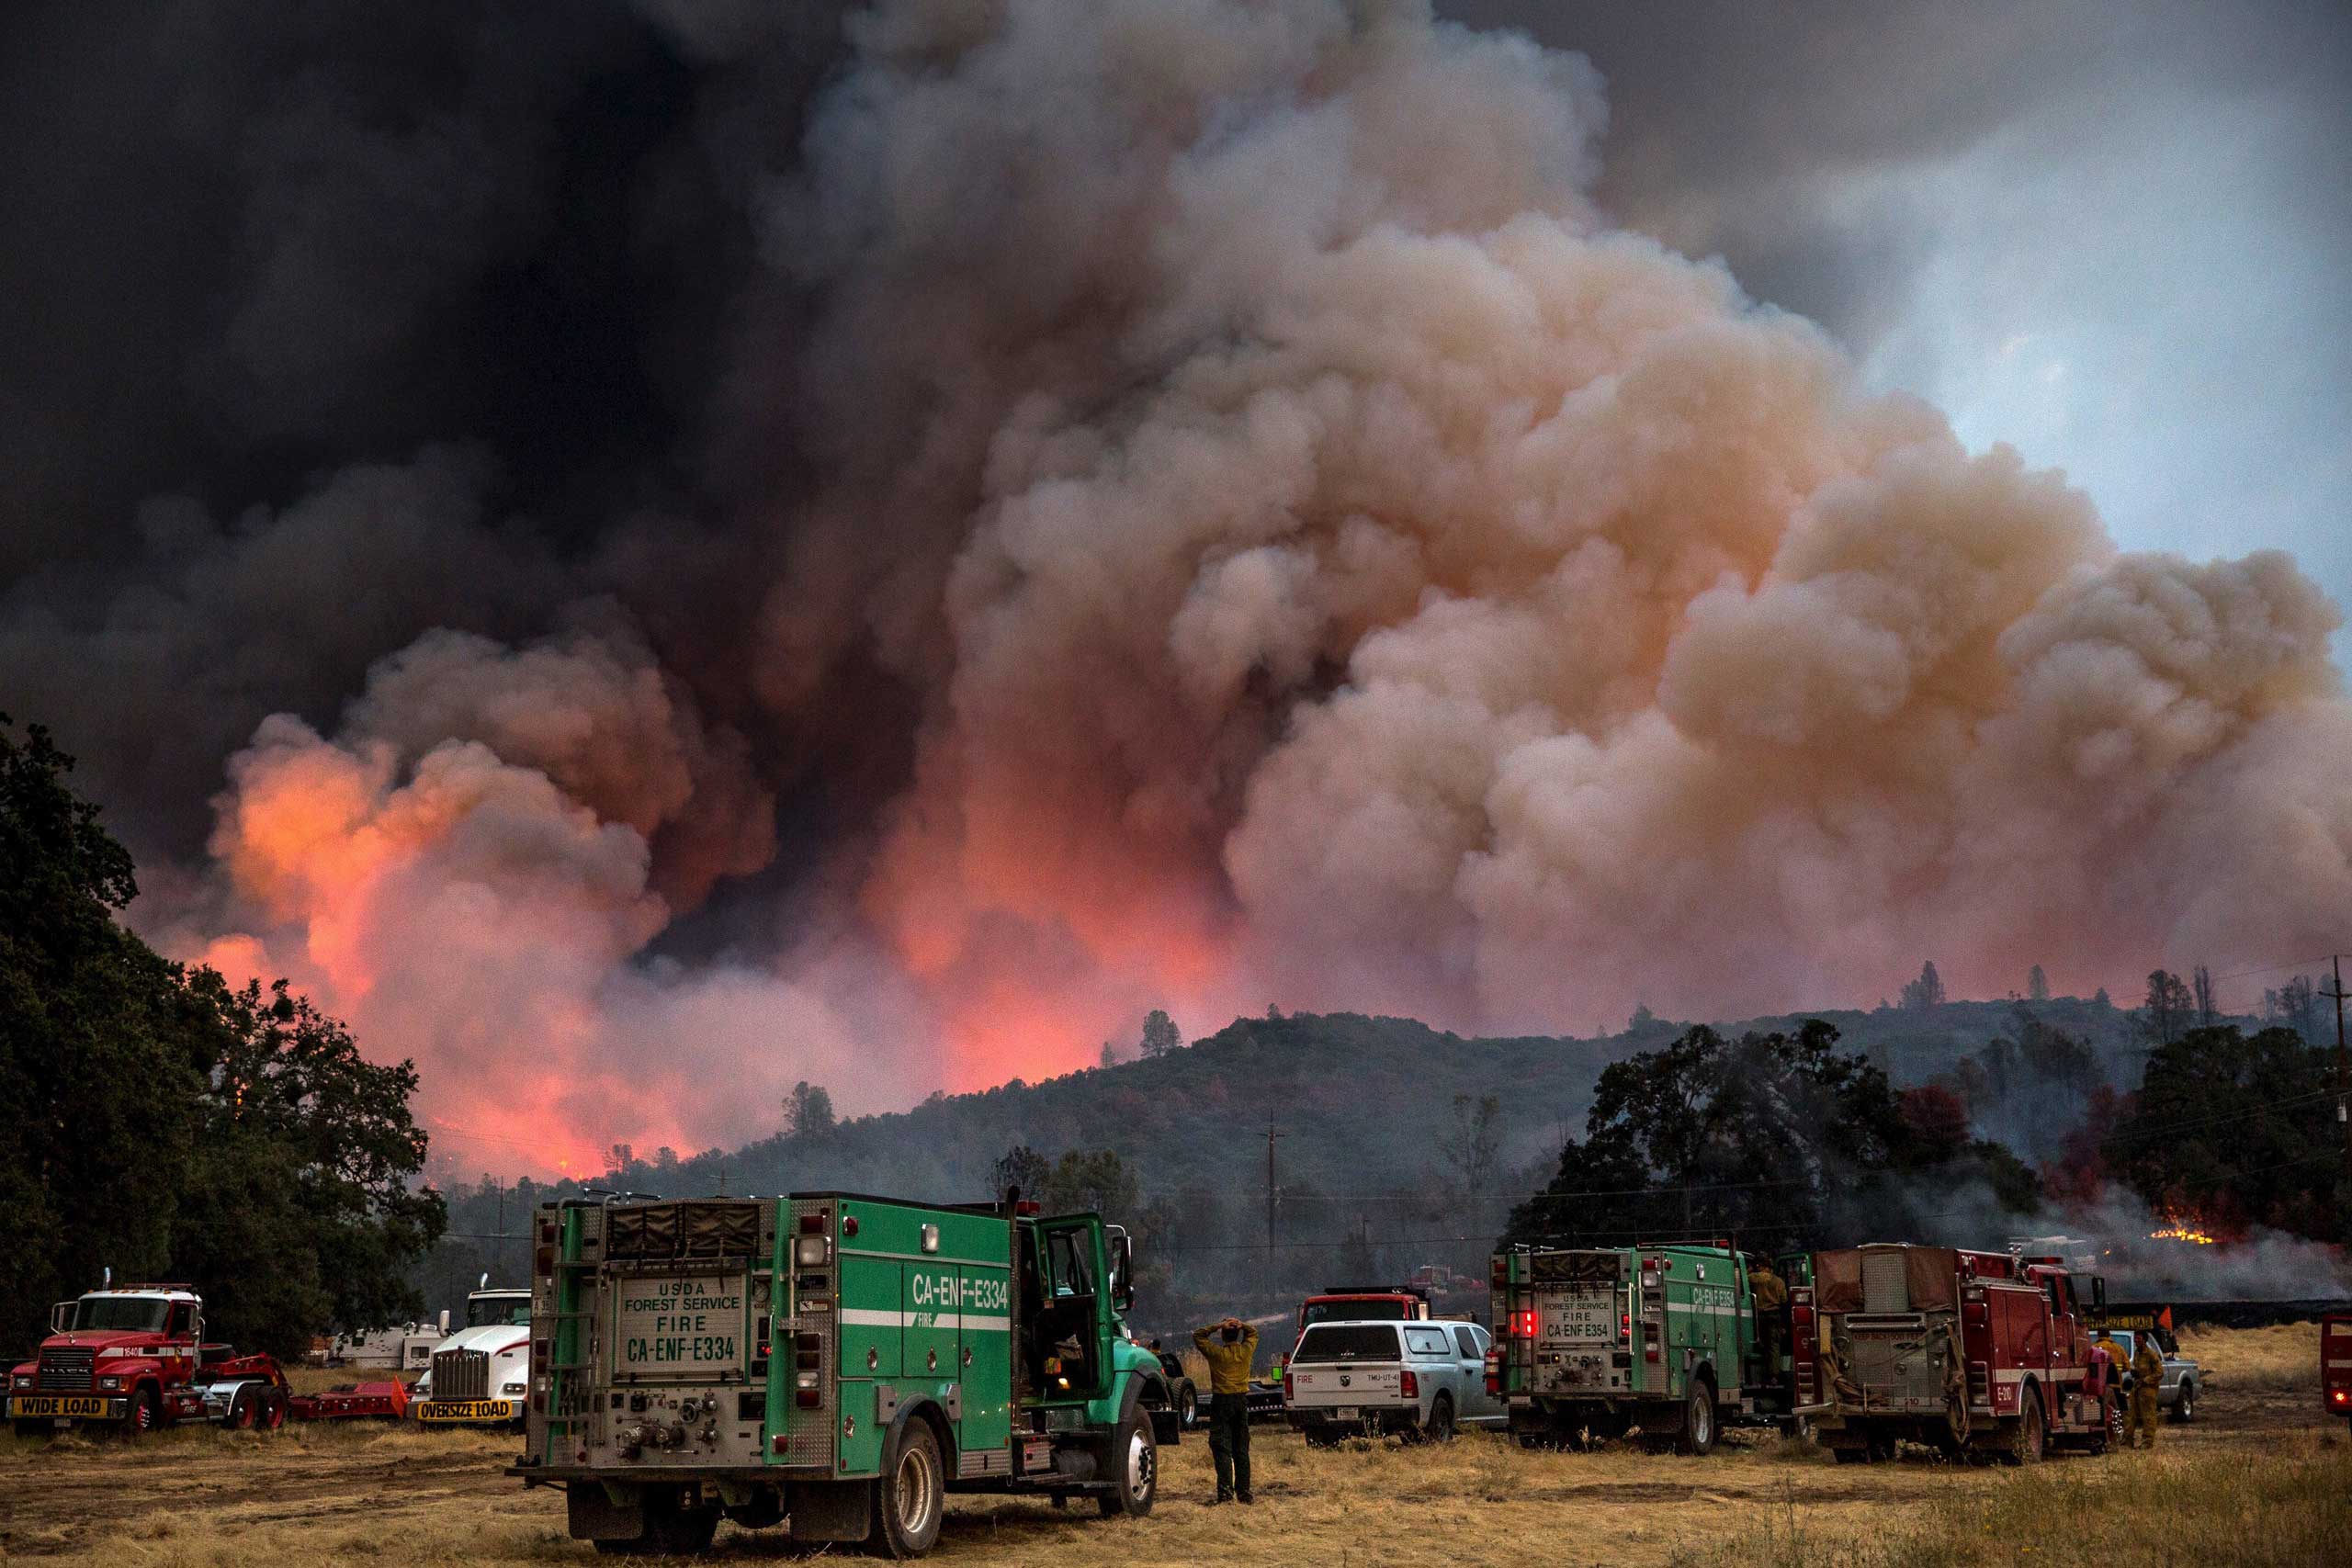 Firefighters watch the Rocky Fire advance in Lake County, Calif. on July 30, 2015.